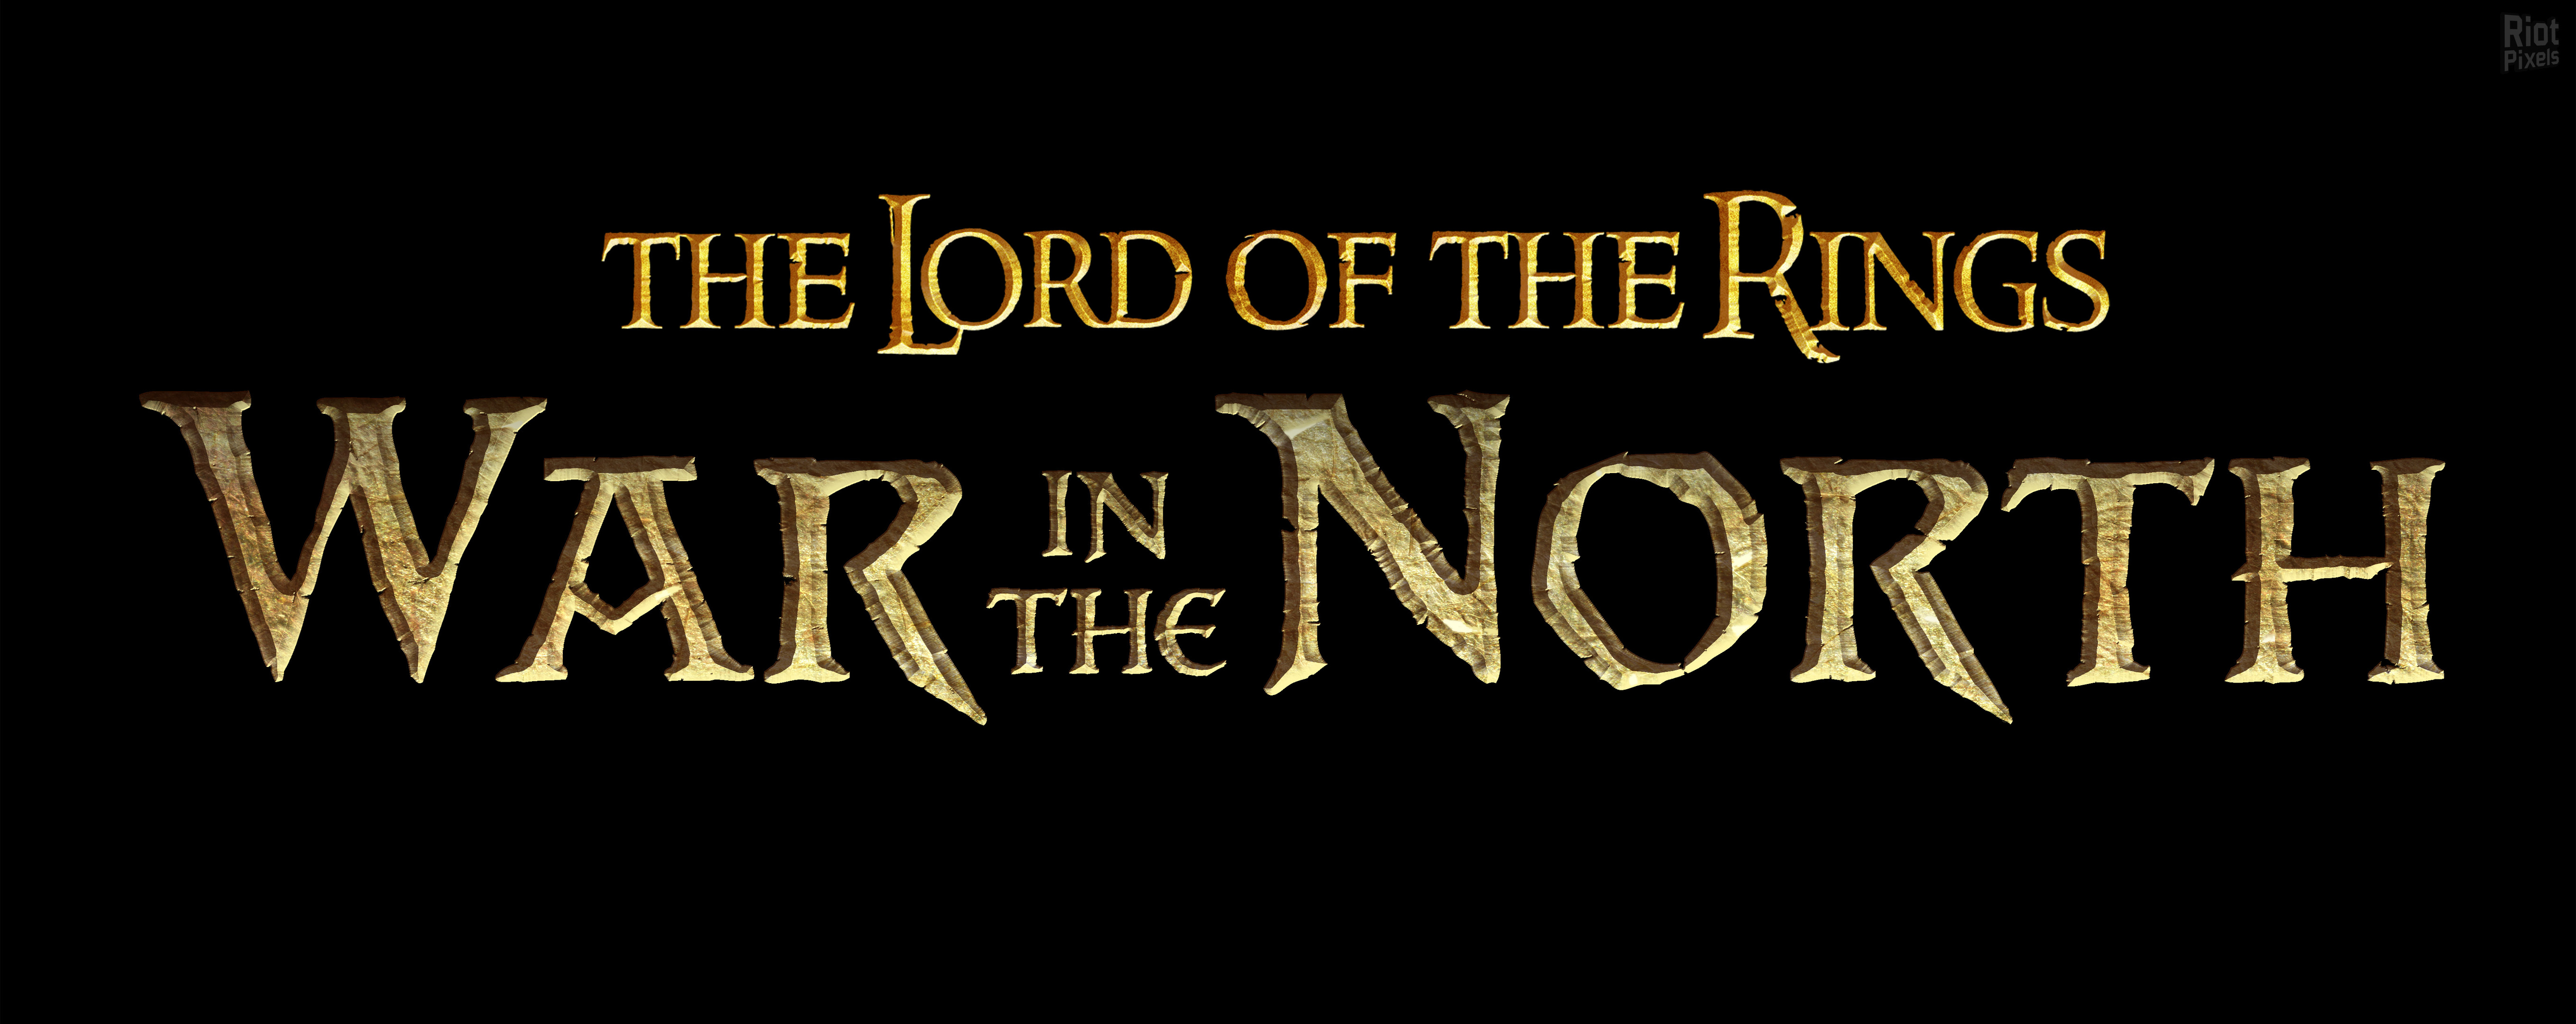 Lord of the rings war in the north купить ключ steam фото 40